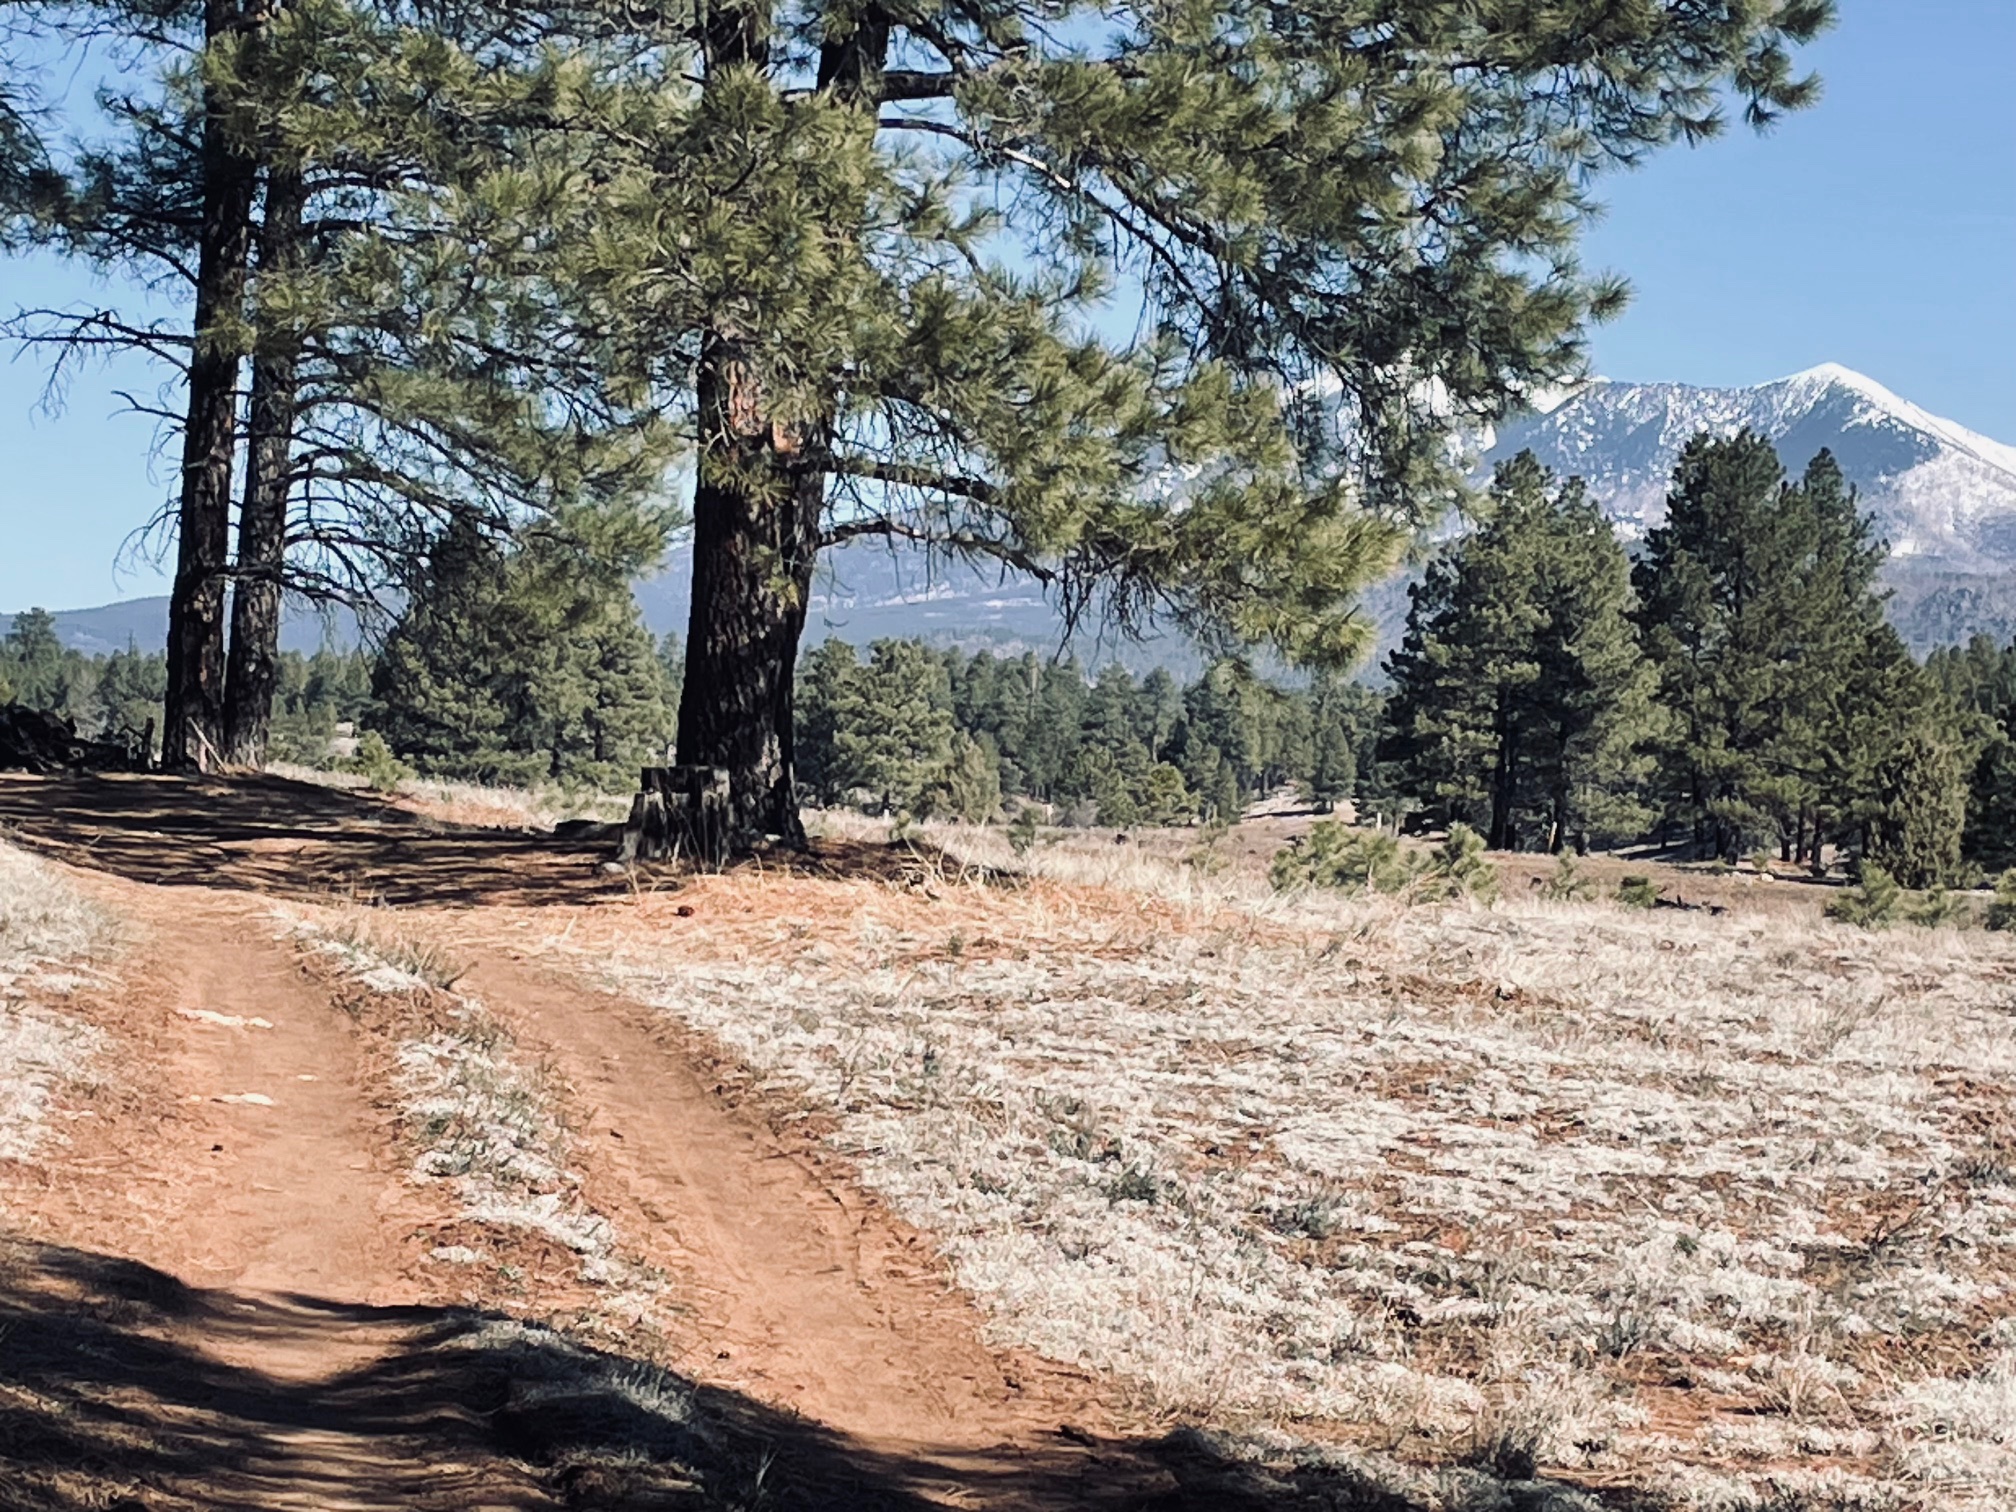 Trail Review: A Shortened ‘Bagel Run’ Loop Along Sinclair Wash and the AZT